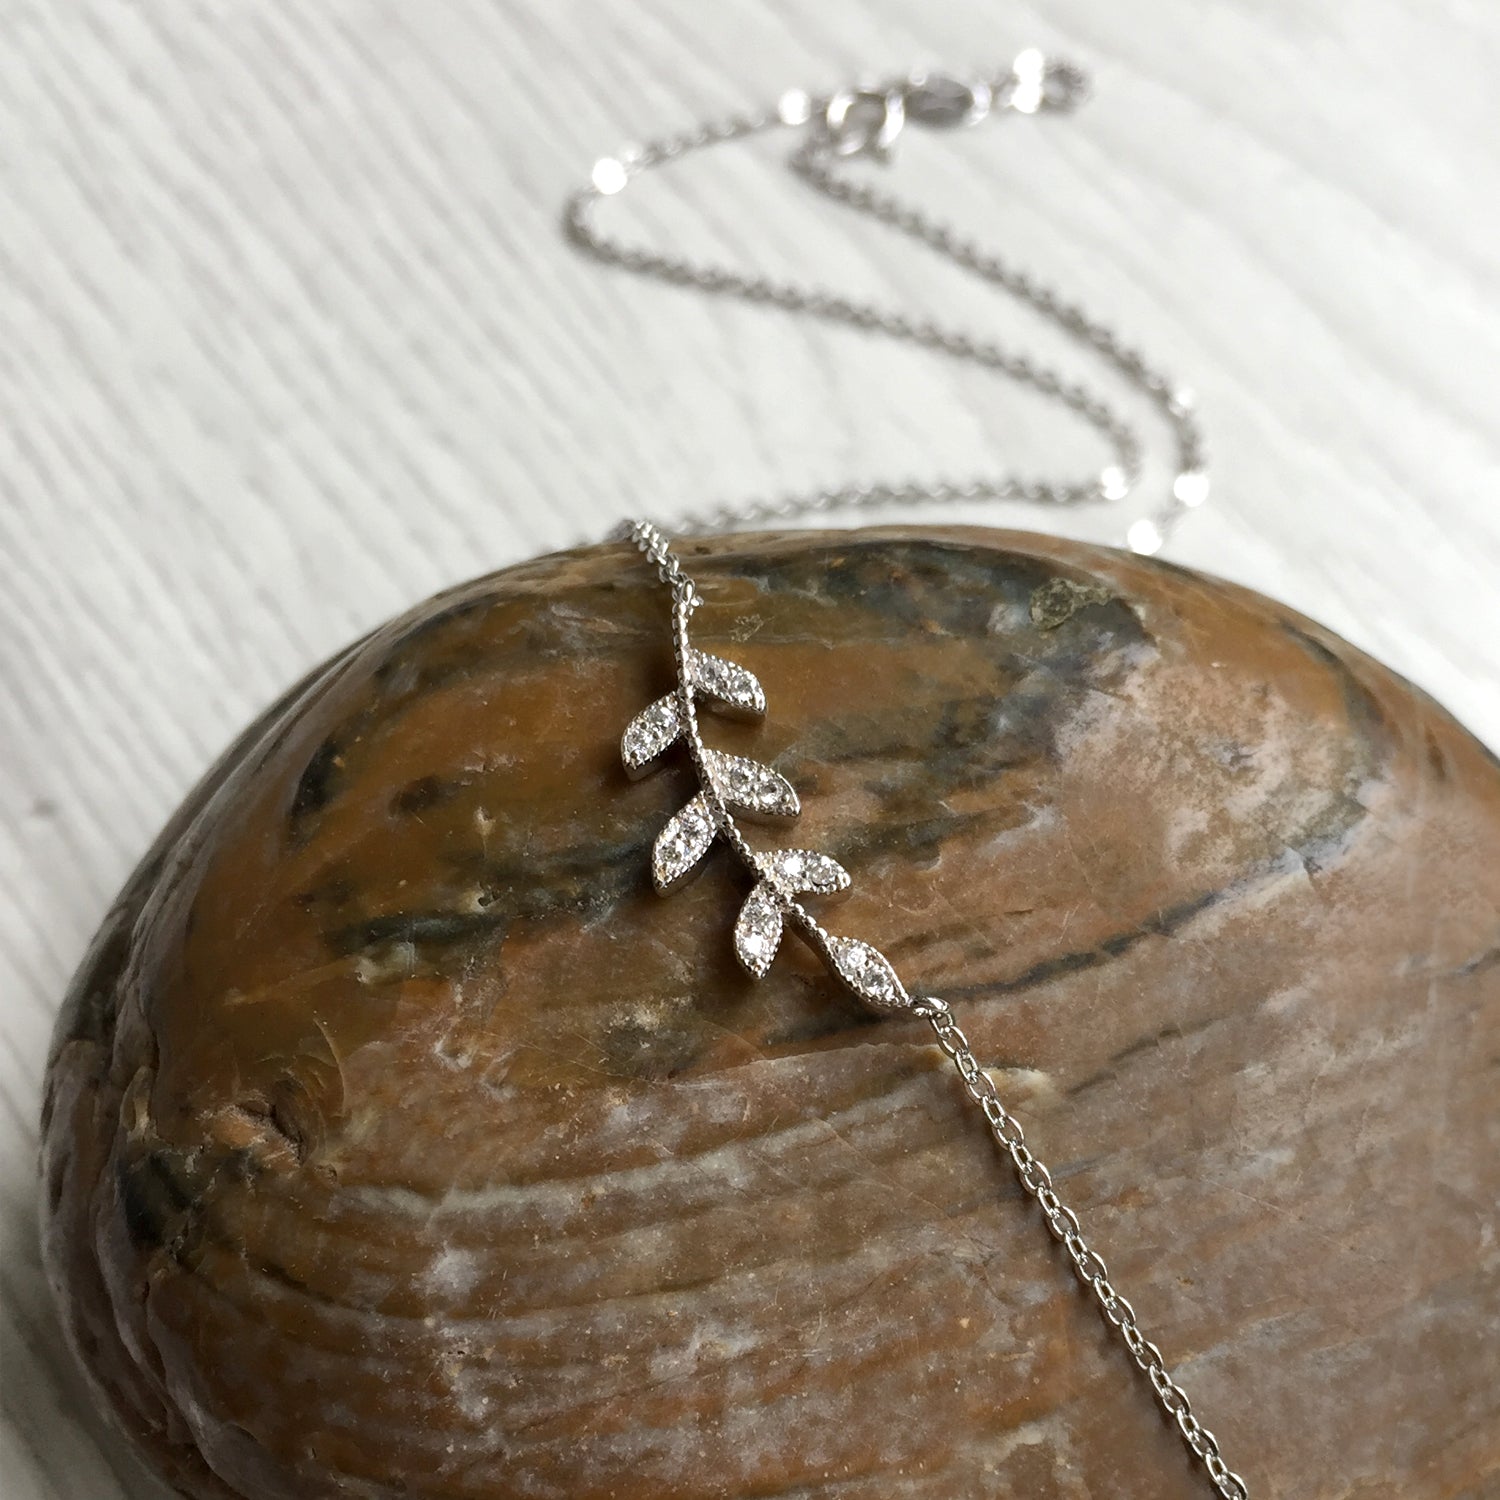 Sterling Silver Leaf Necklace, Delicate Silver Necklace, Valentines Day Gift Idea